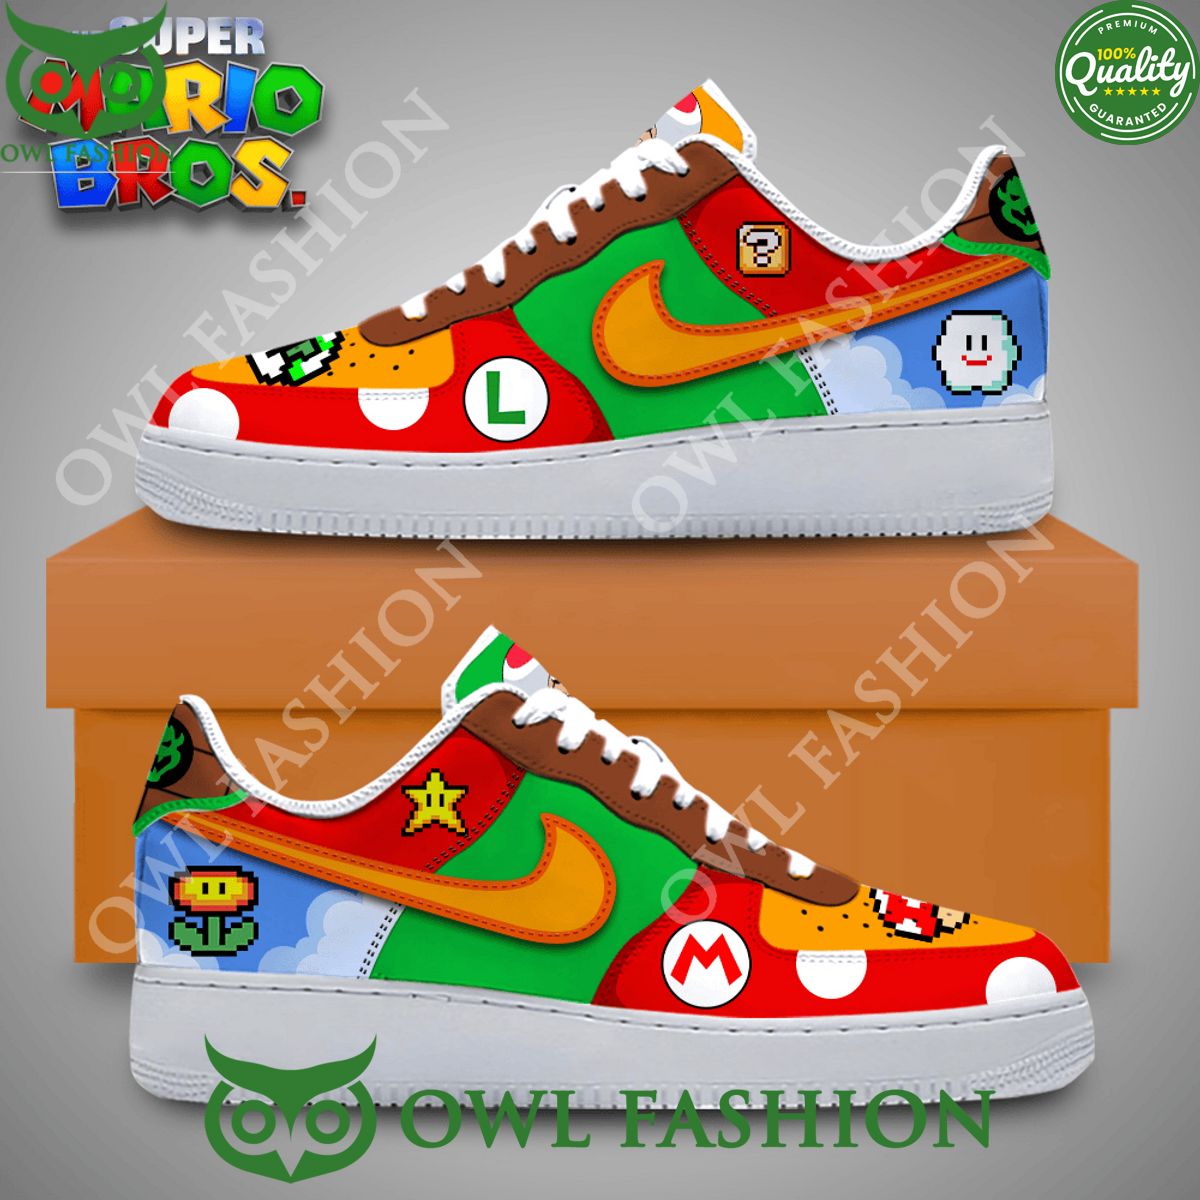 the super mario bros game level nike air force 1 shoes 1 UCDsL.jpg